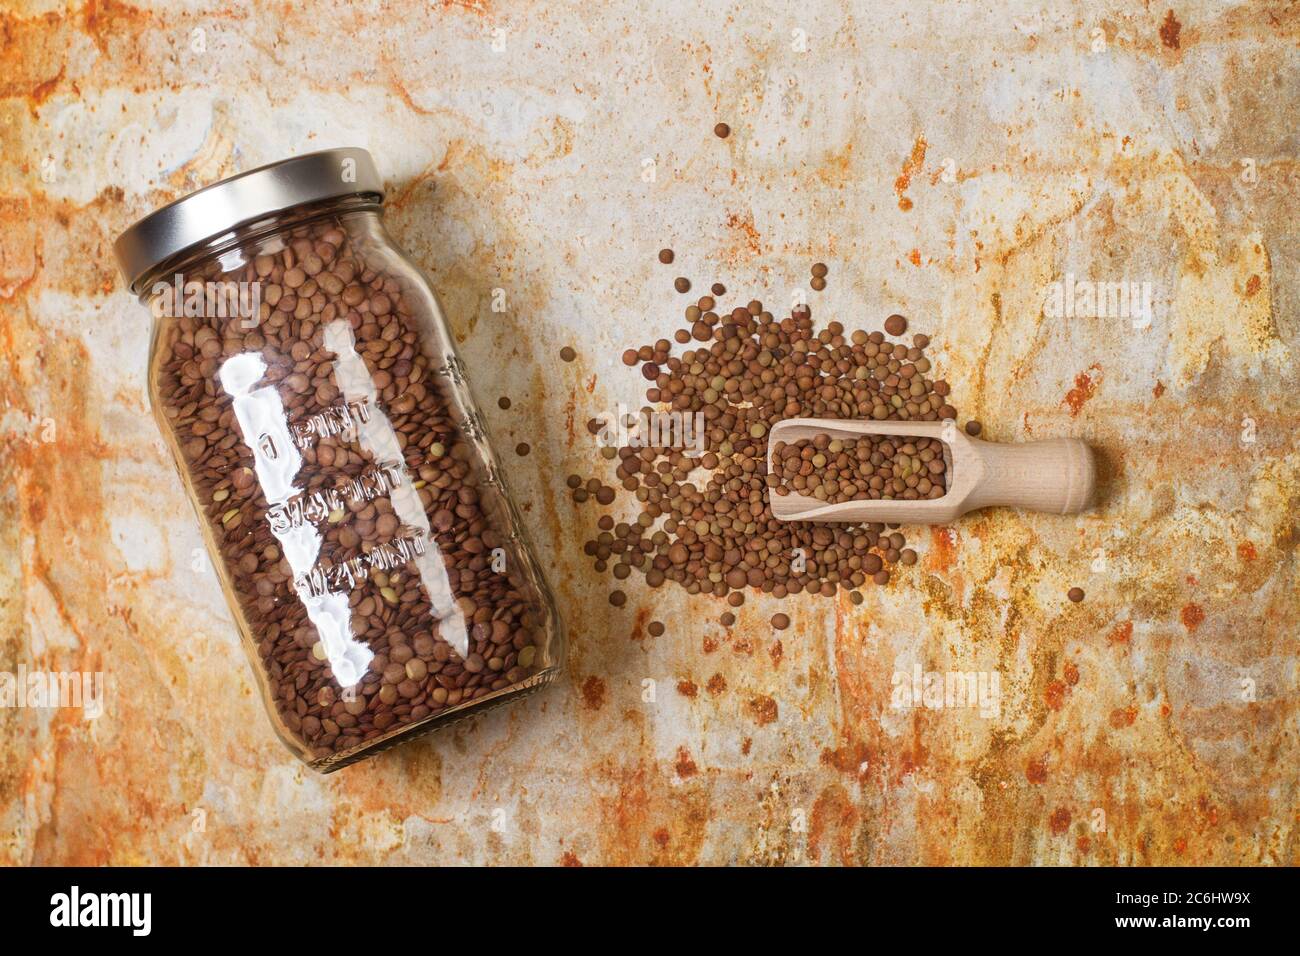 Lentils in a crystal jar and on a rusty metal background in a top view Stock Photo